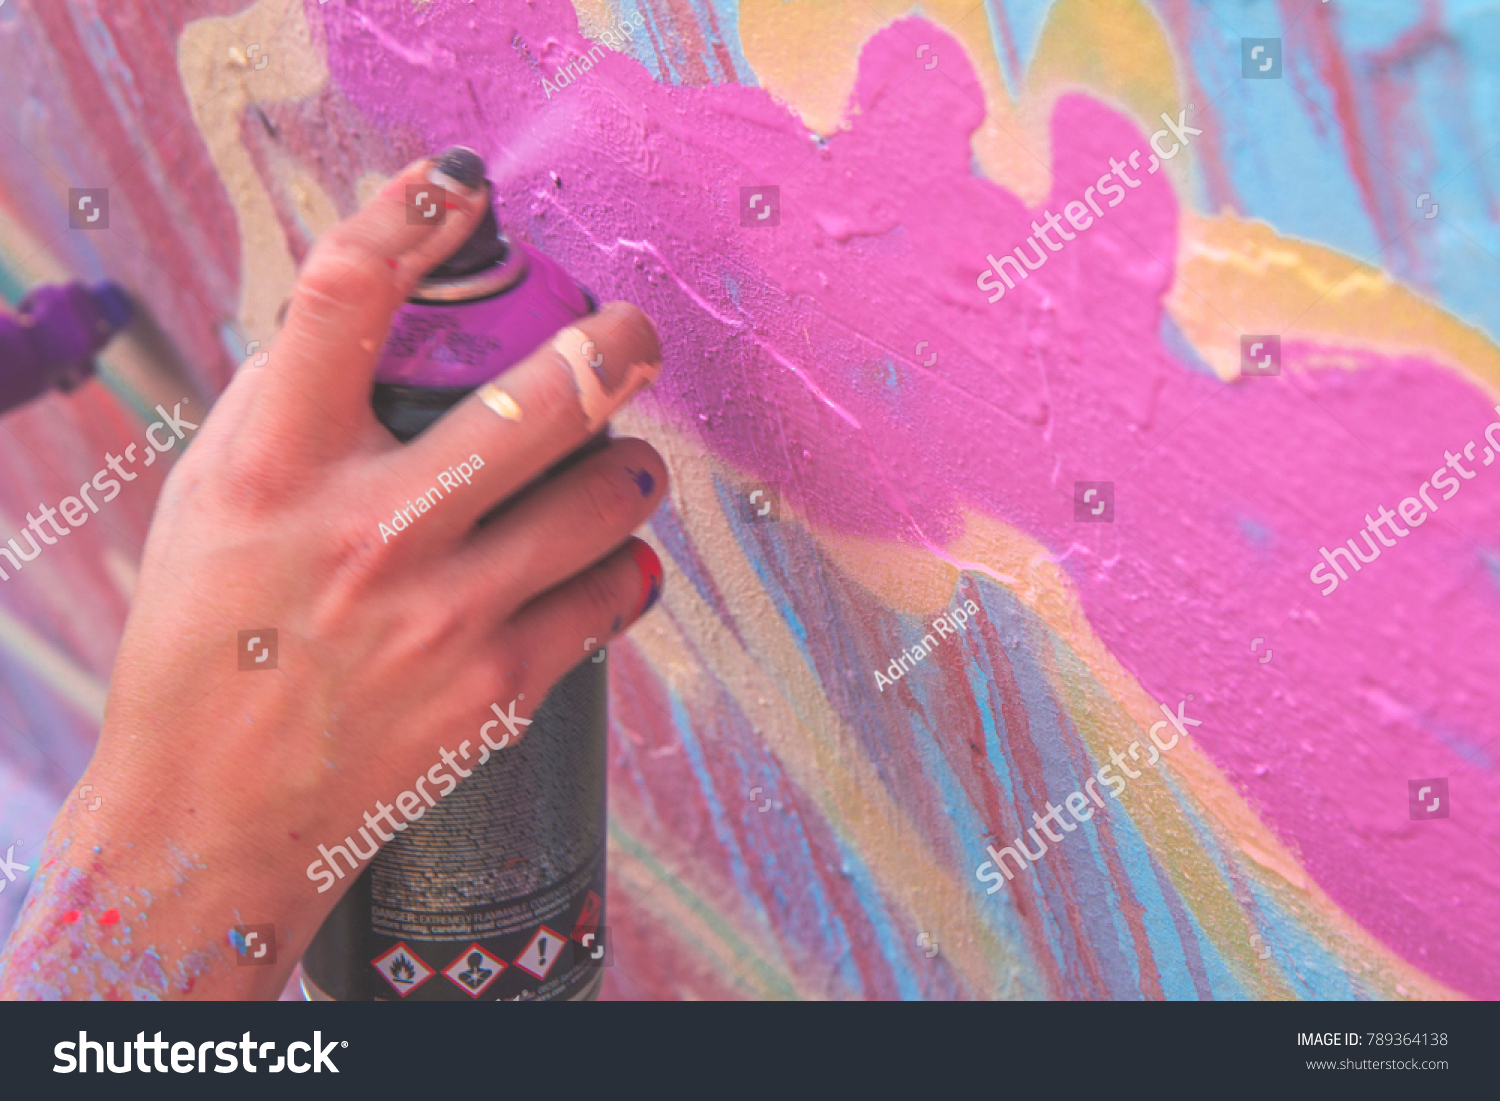 Graffiti artist Hand painting with aerosol spray on the wall, asphalt paint work. Urban man performing with murales - Concept of colourful  modern art - Focus on his hand .graffiti, wall, paint, art,  #789364138